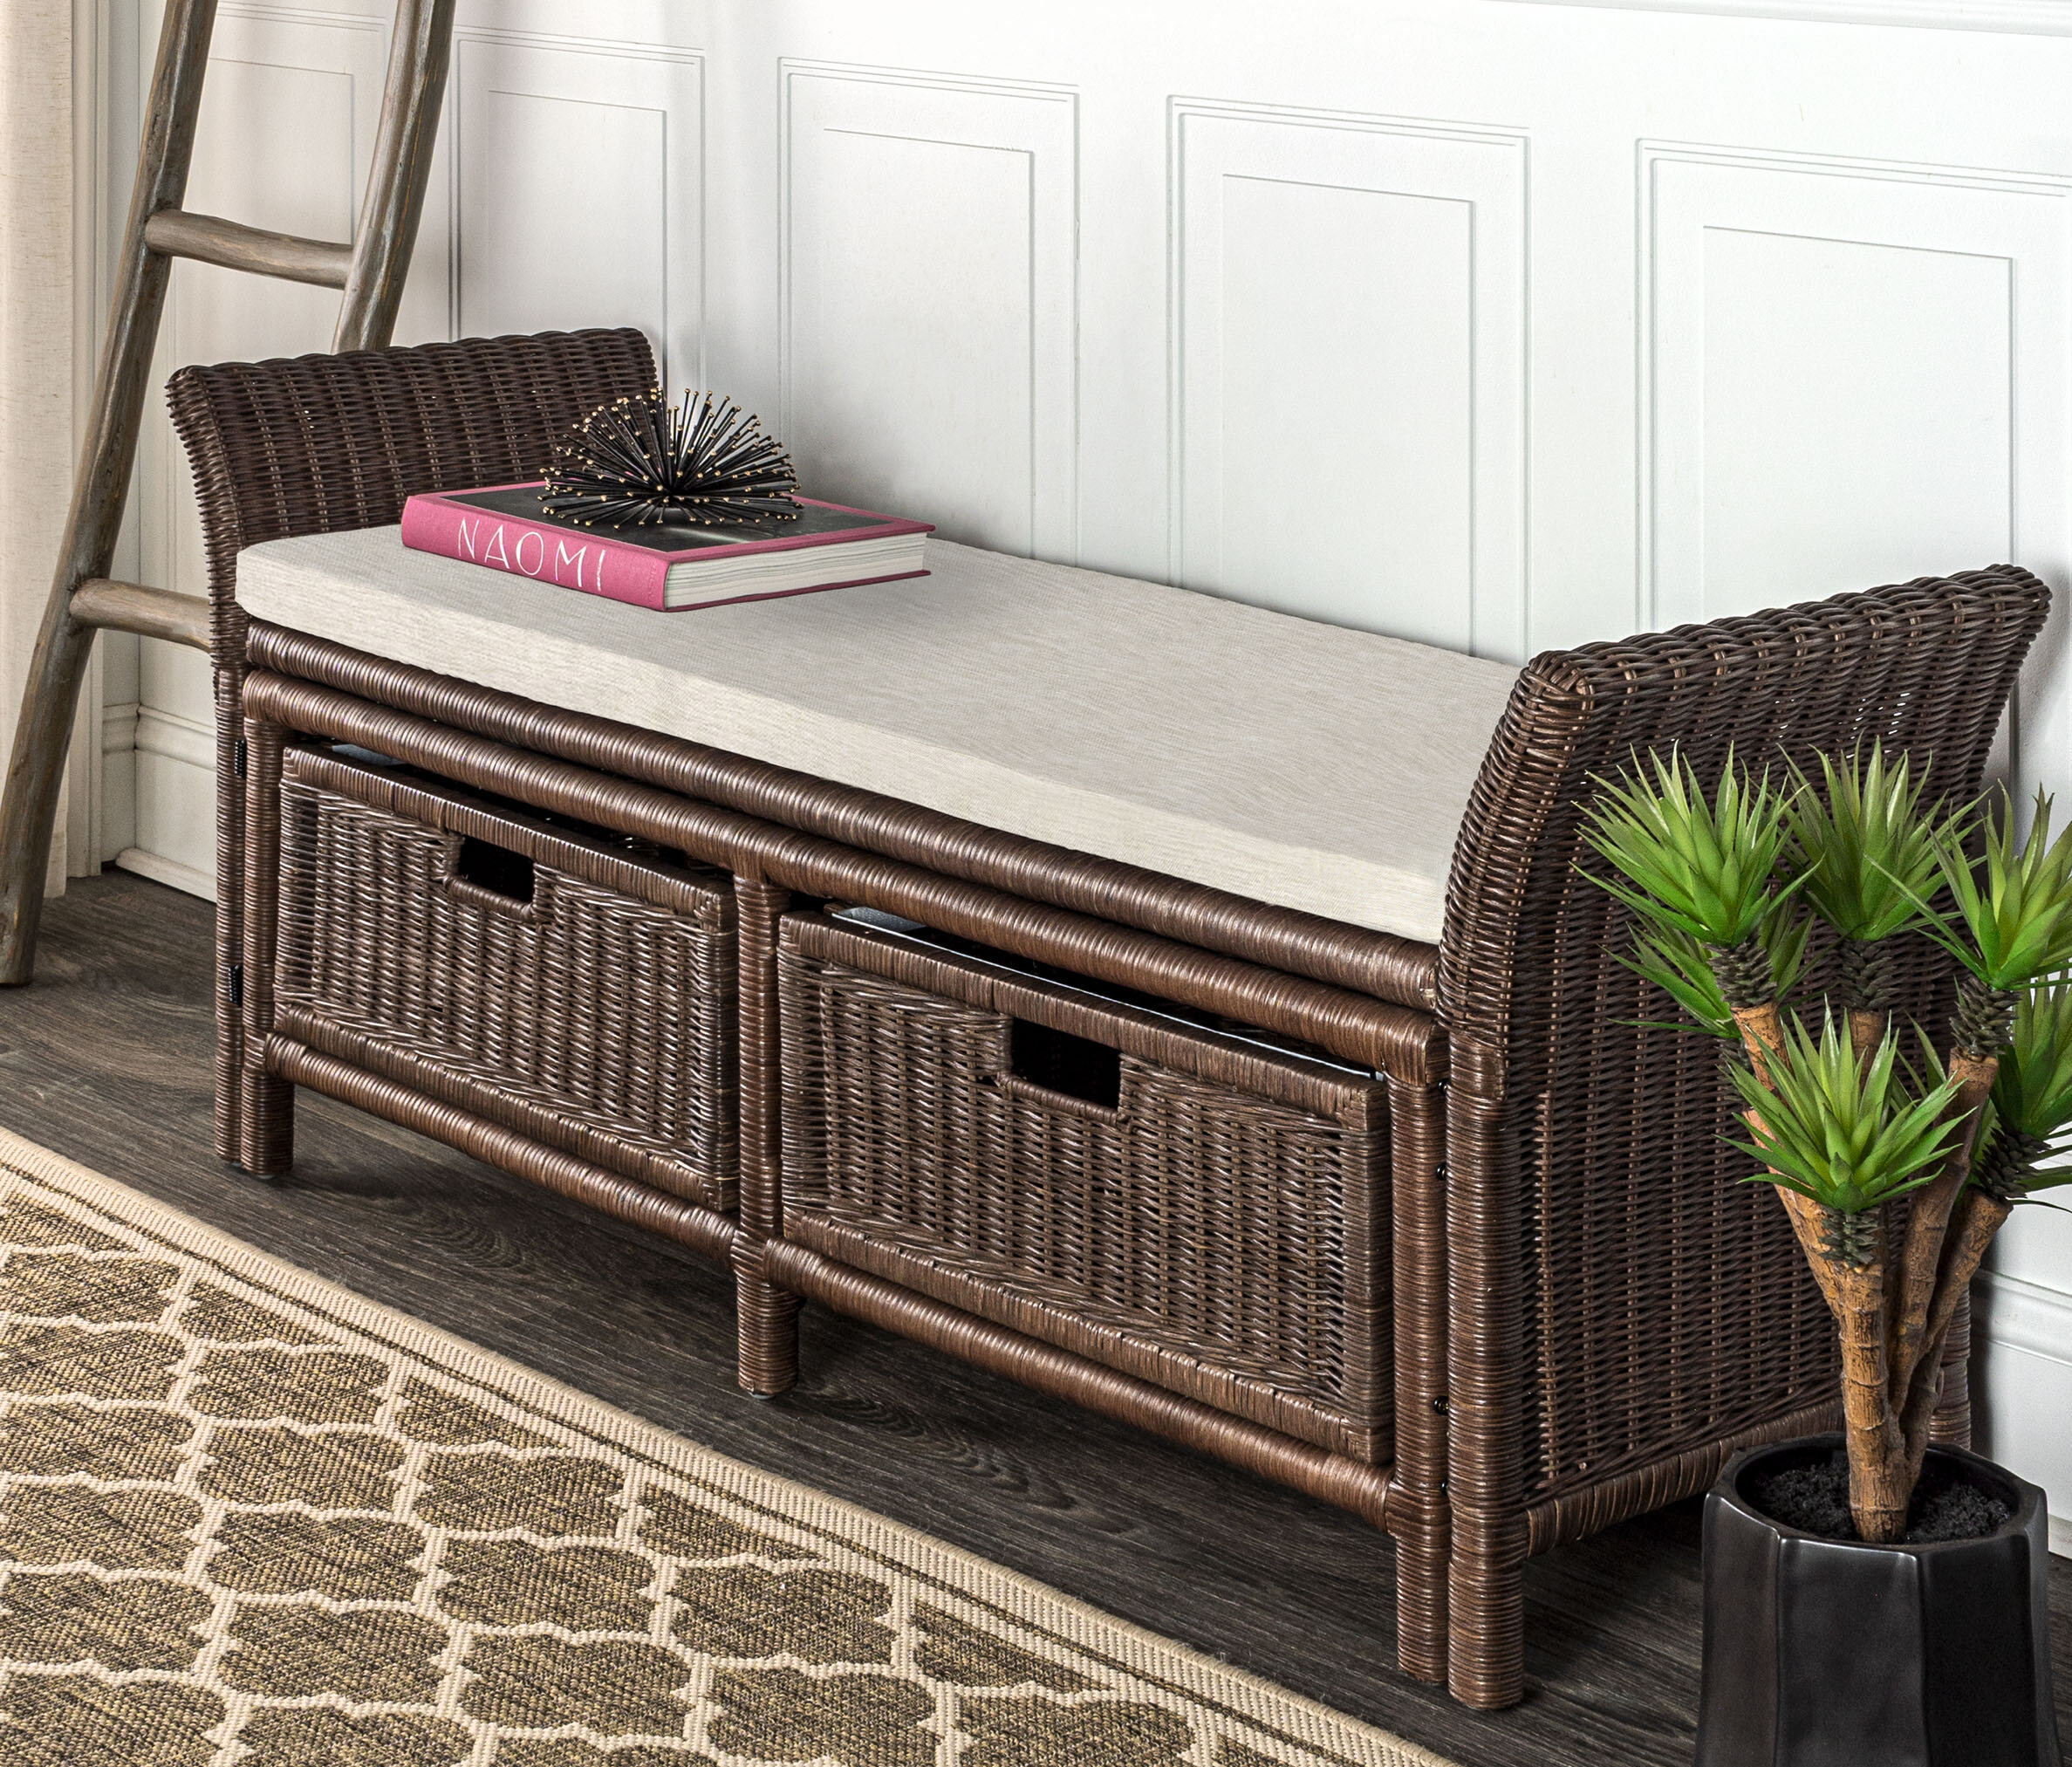 2 Drawer Wicker Bench With Cushion